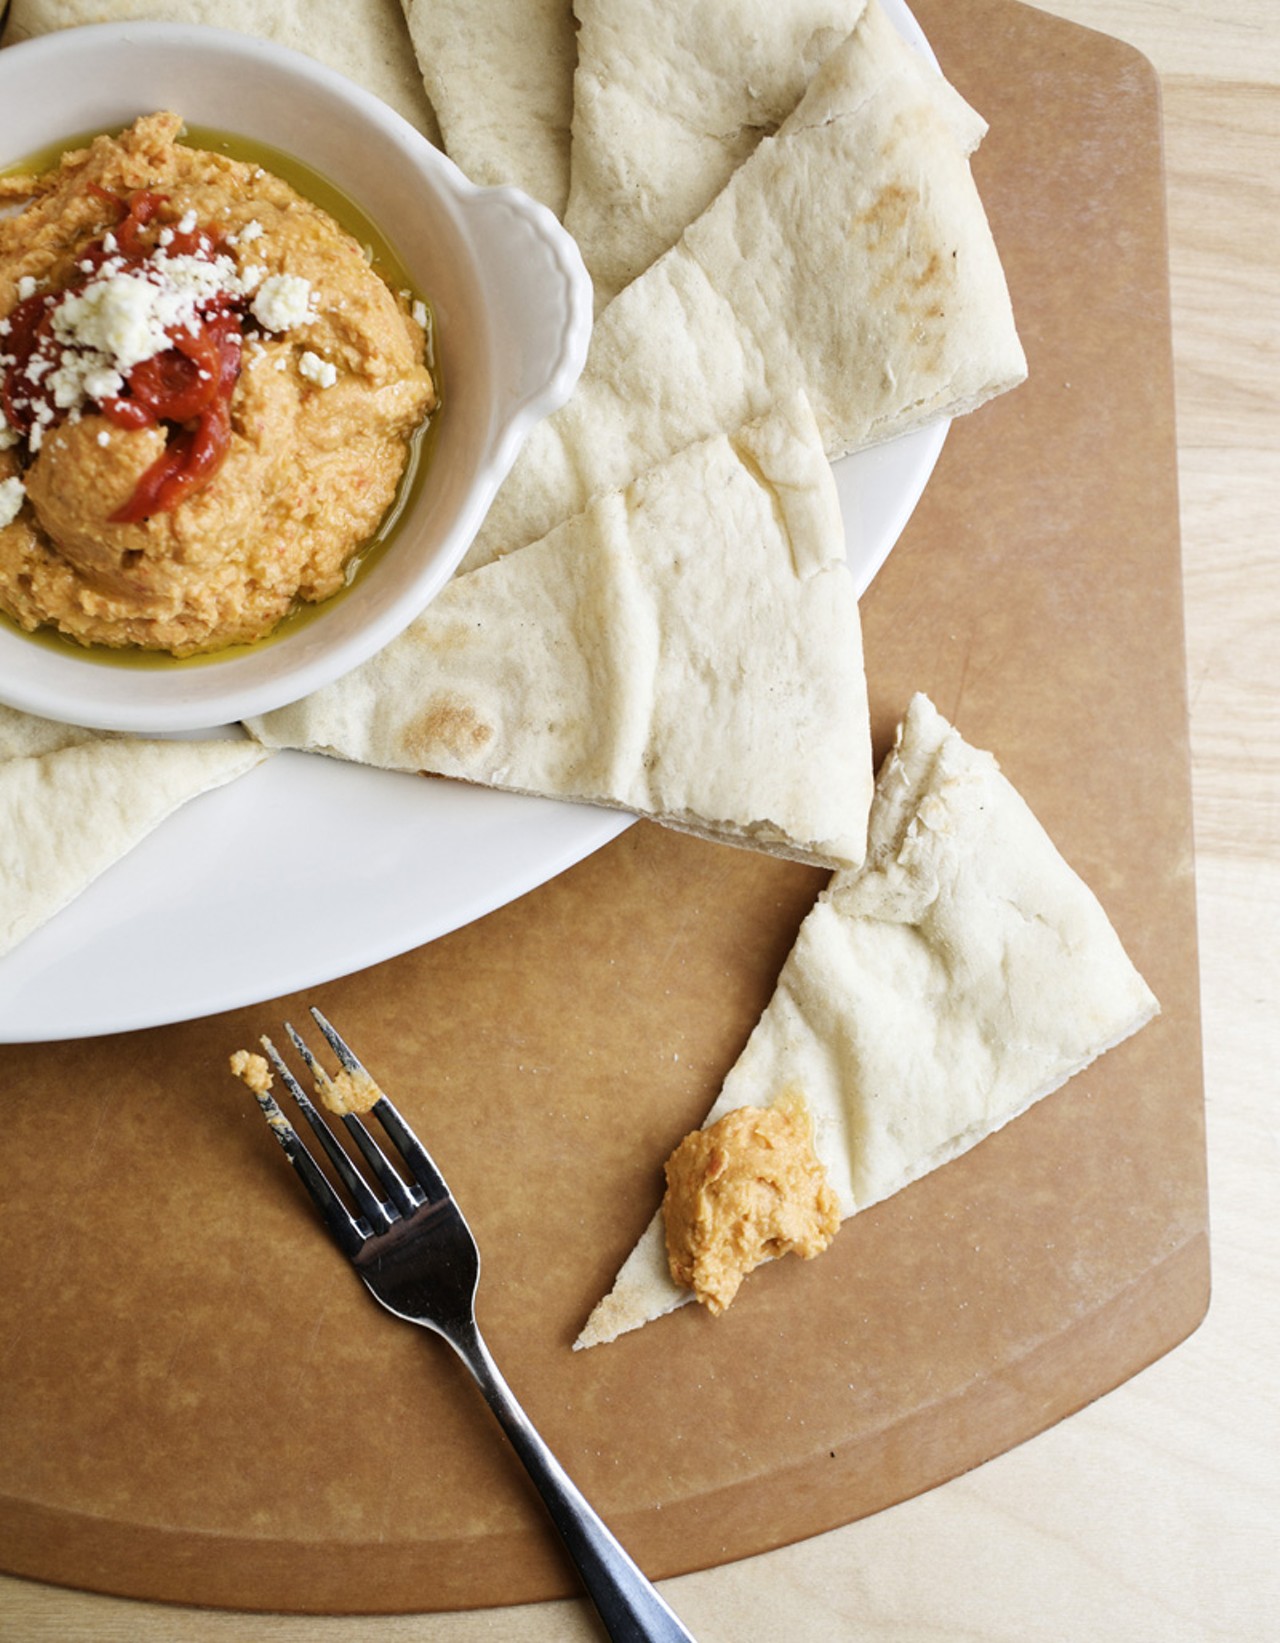 Roasted Red Pepper Hummus appetizer is served with warm pita or fresh vegetables (not shown.)